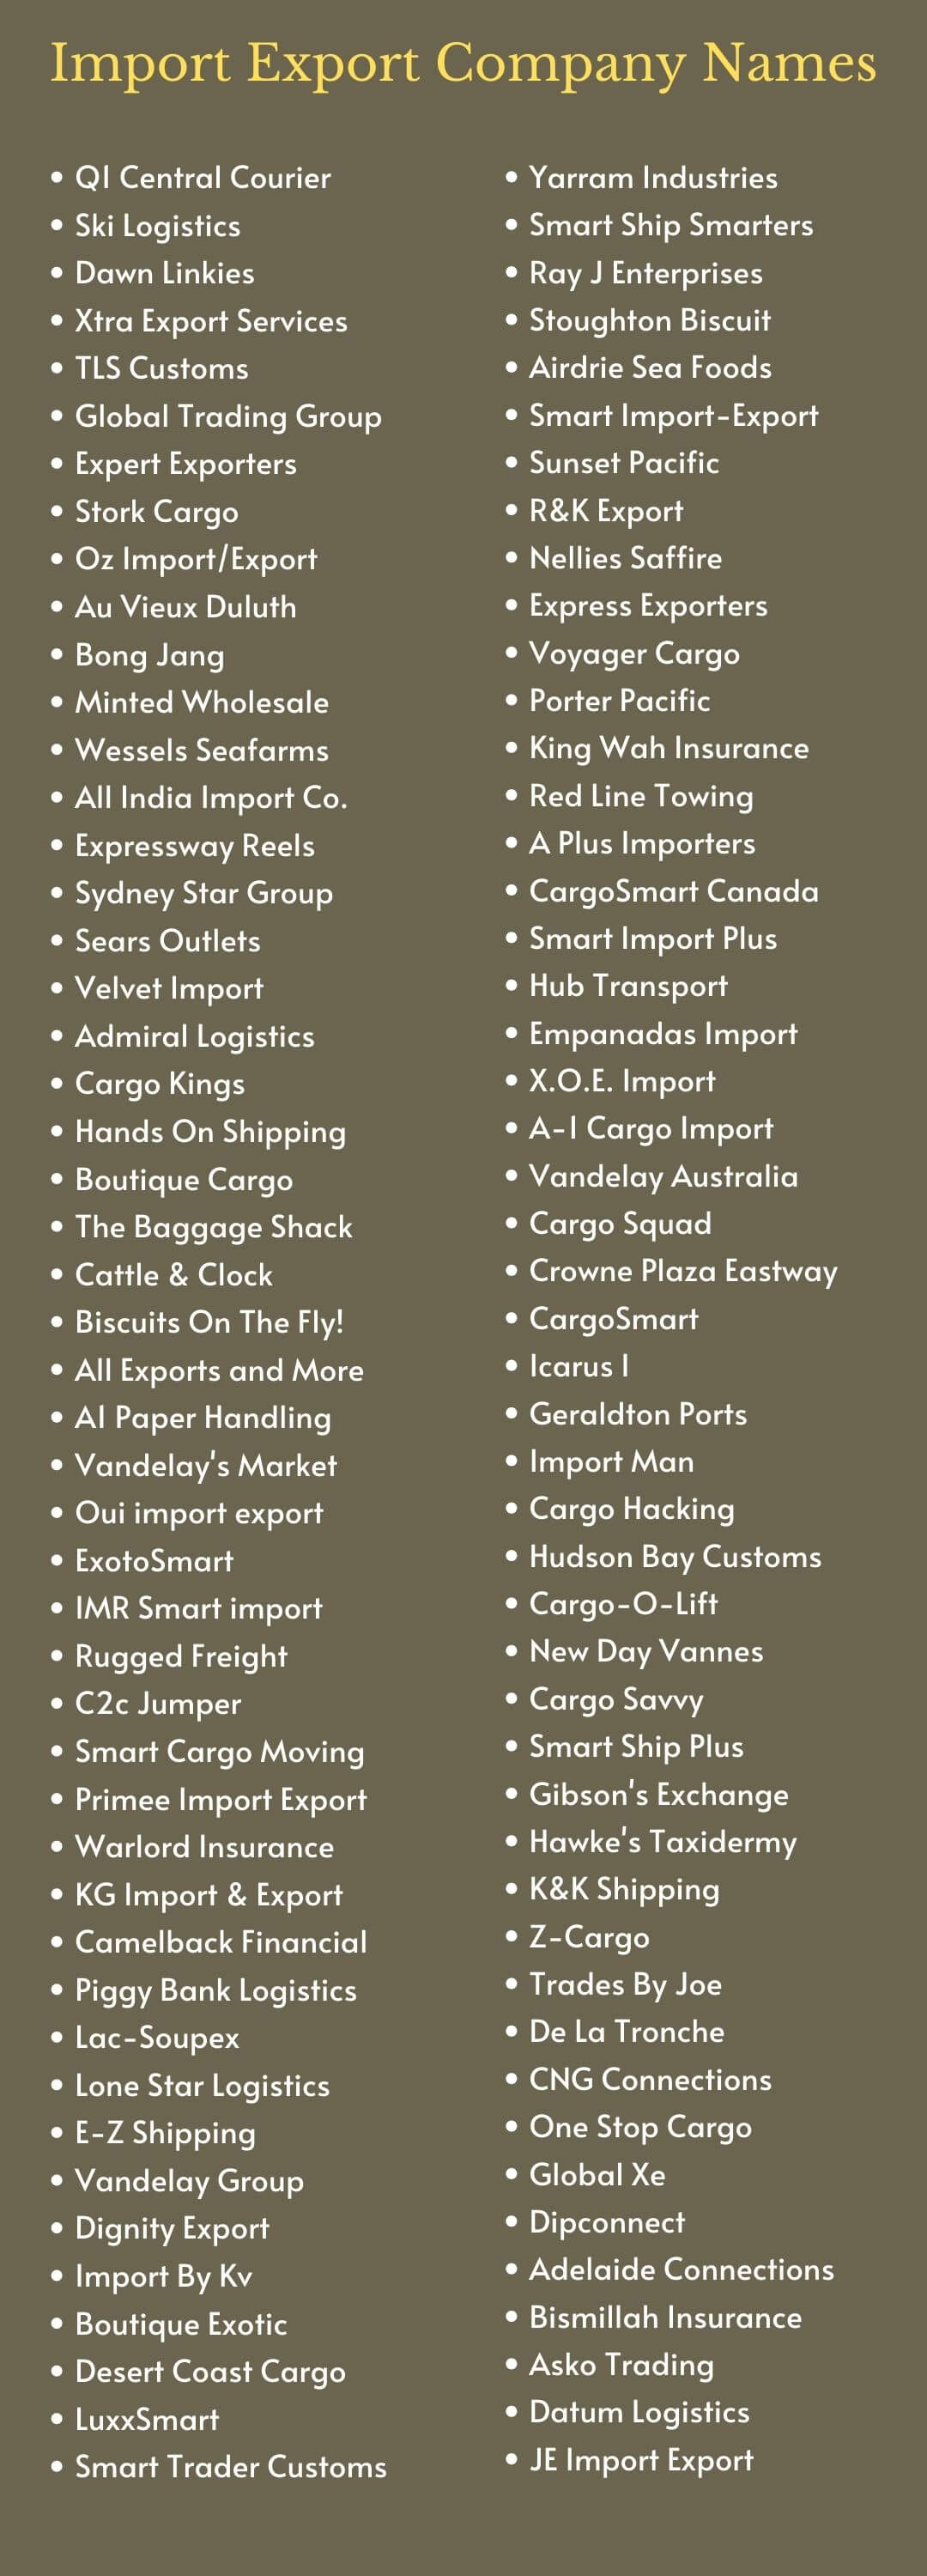 Import Export Company Names: infographic